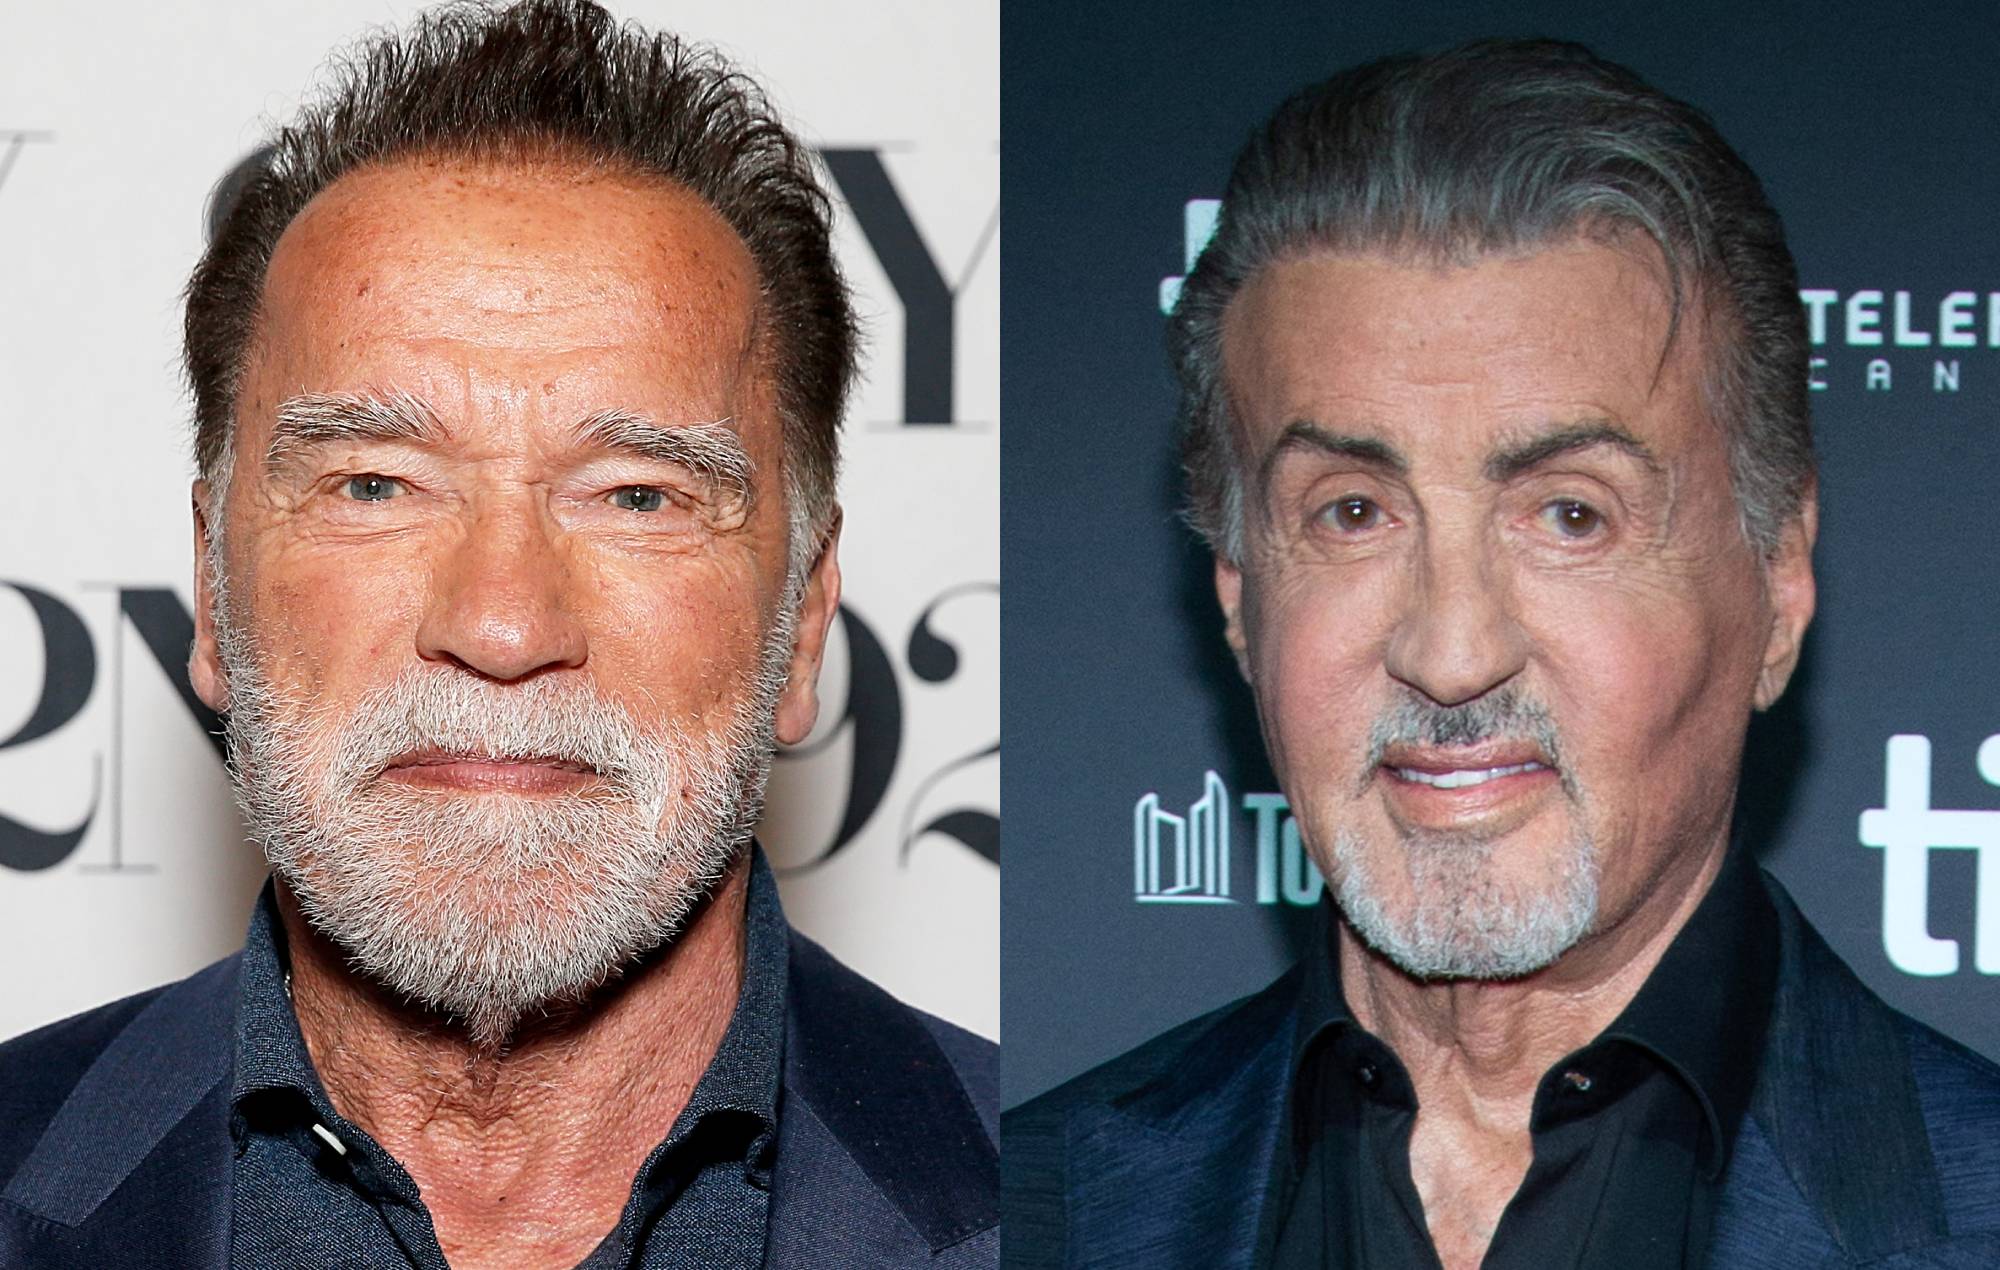 Arnold Schwarzenegger says Stallone rivalry went “out of control”